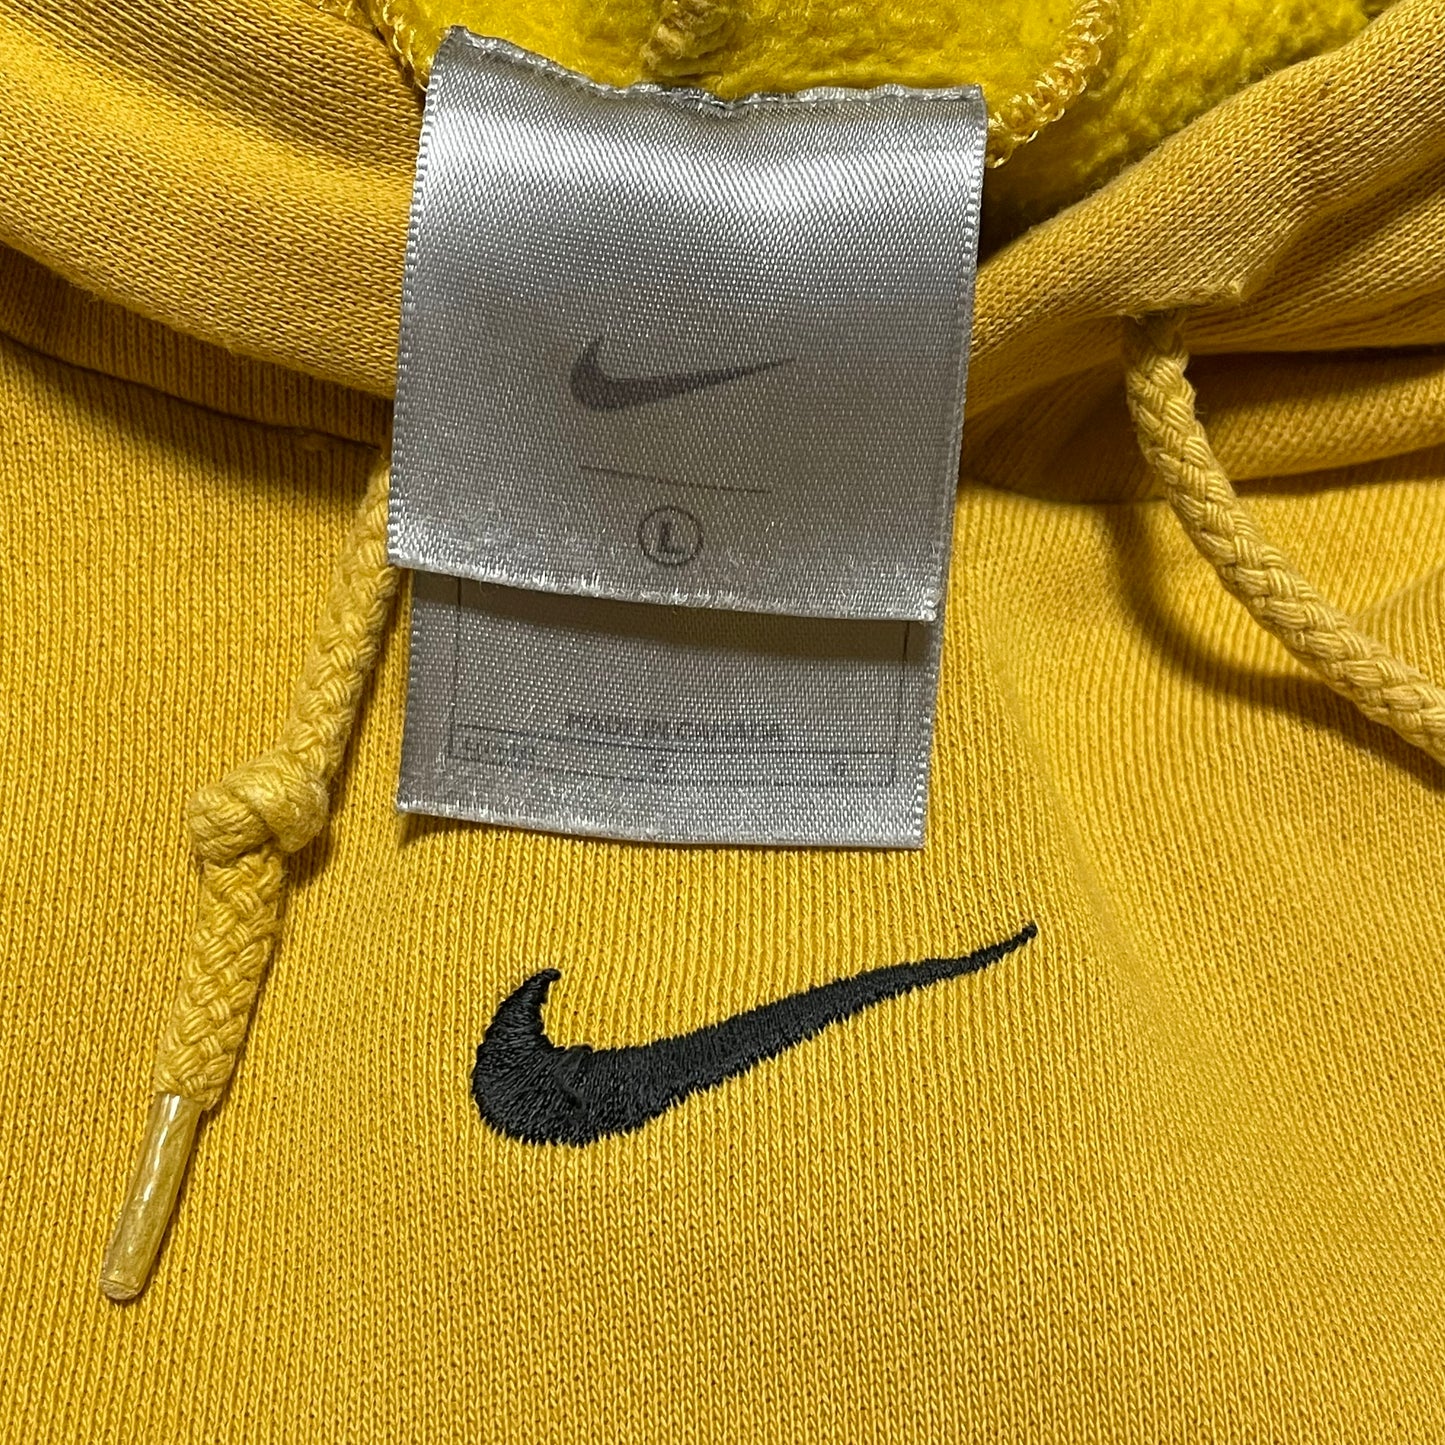 Vintage Nike Mid Check Center Swoosh Hoodie (Yellow)